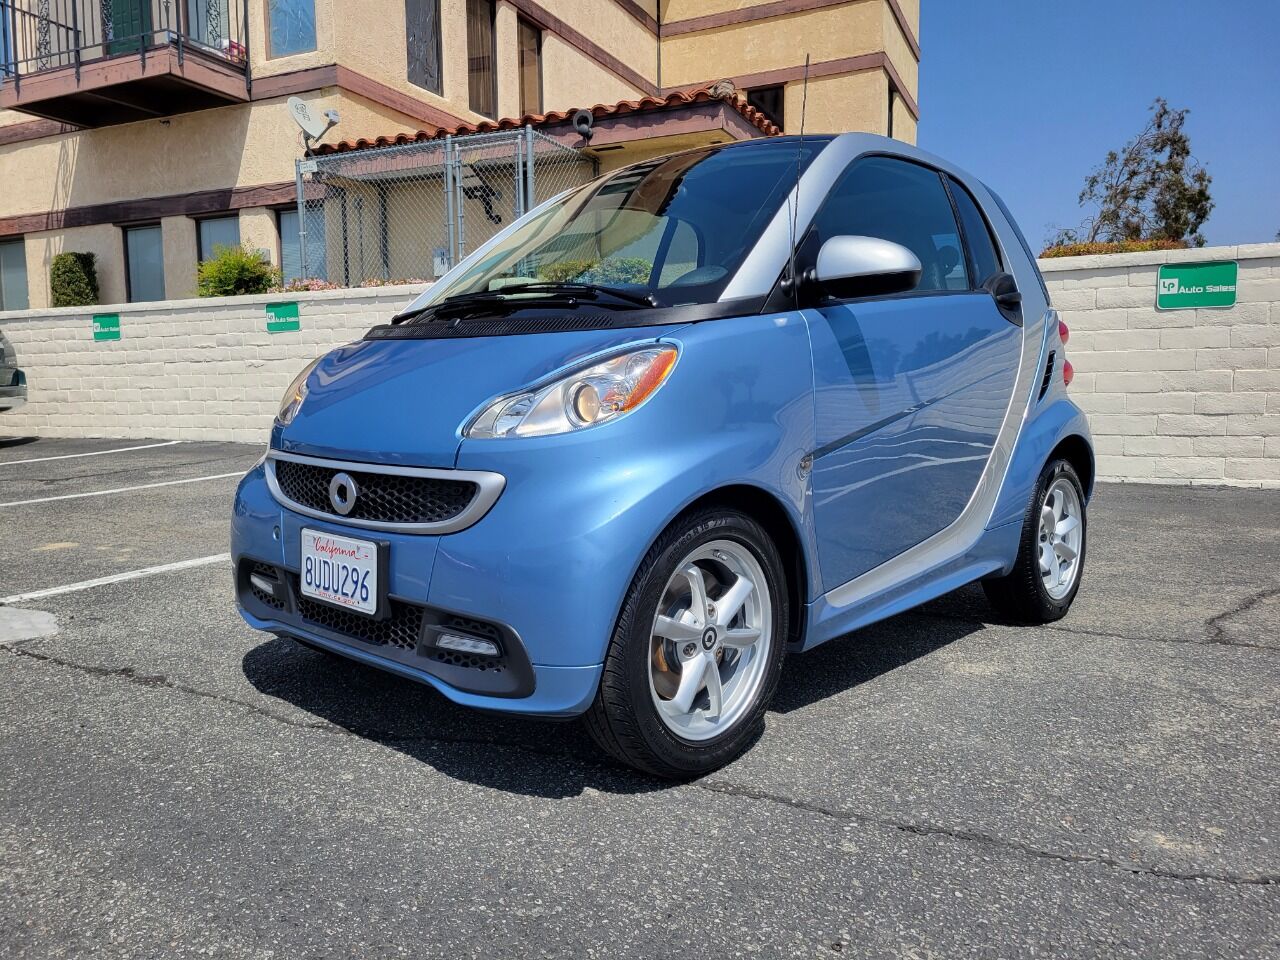 Smart fortwo For Sale - Carsforsale.com®